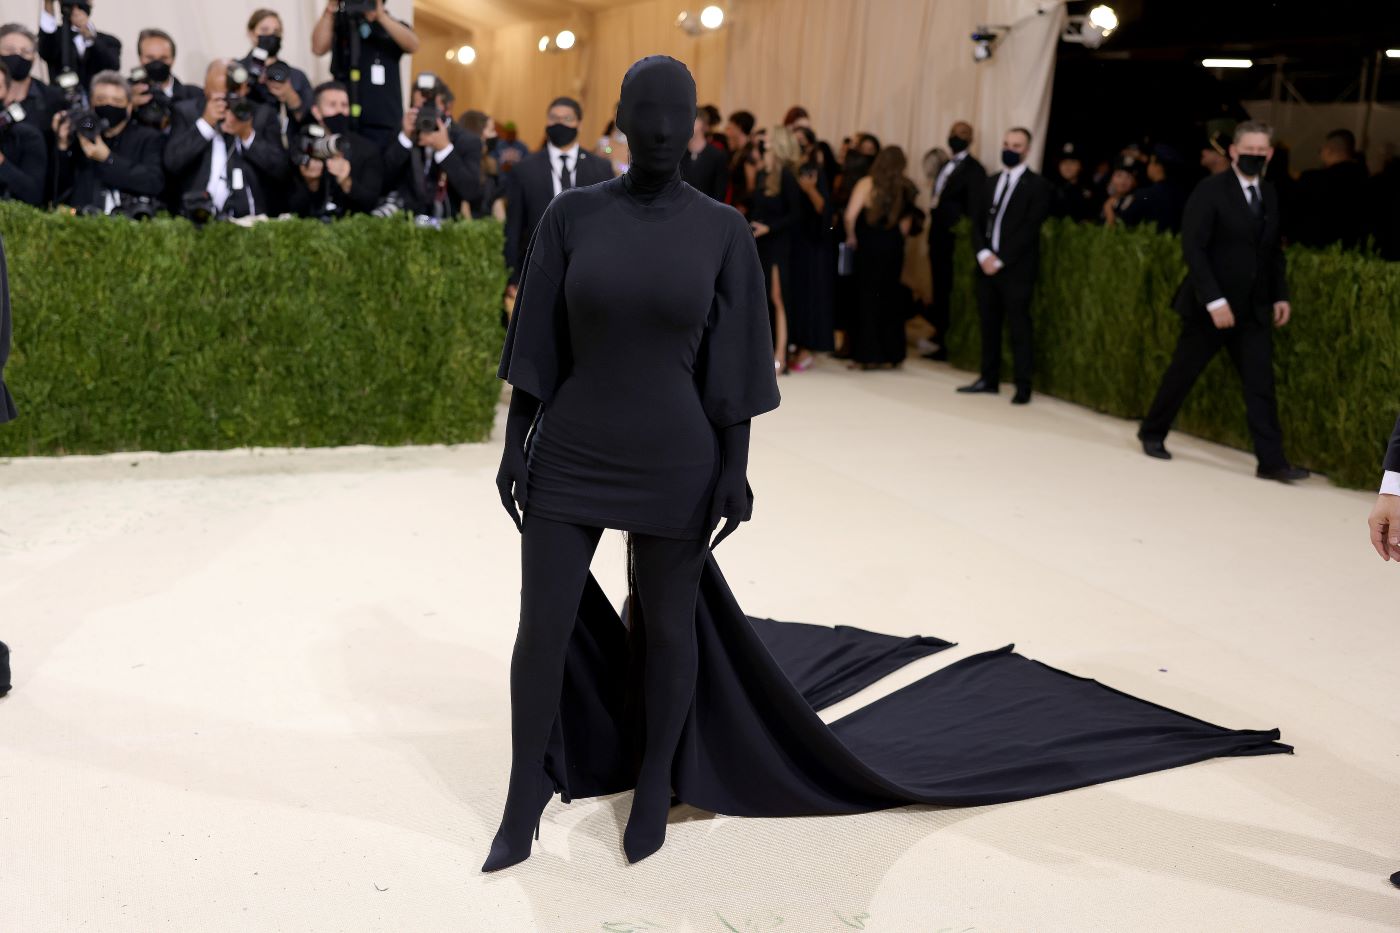 Kim Kardashian West in her famous Met Gala black outfit on the red carpet with photographers behind her.